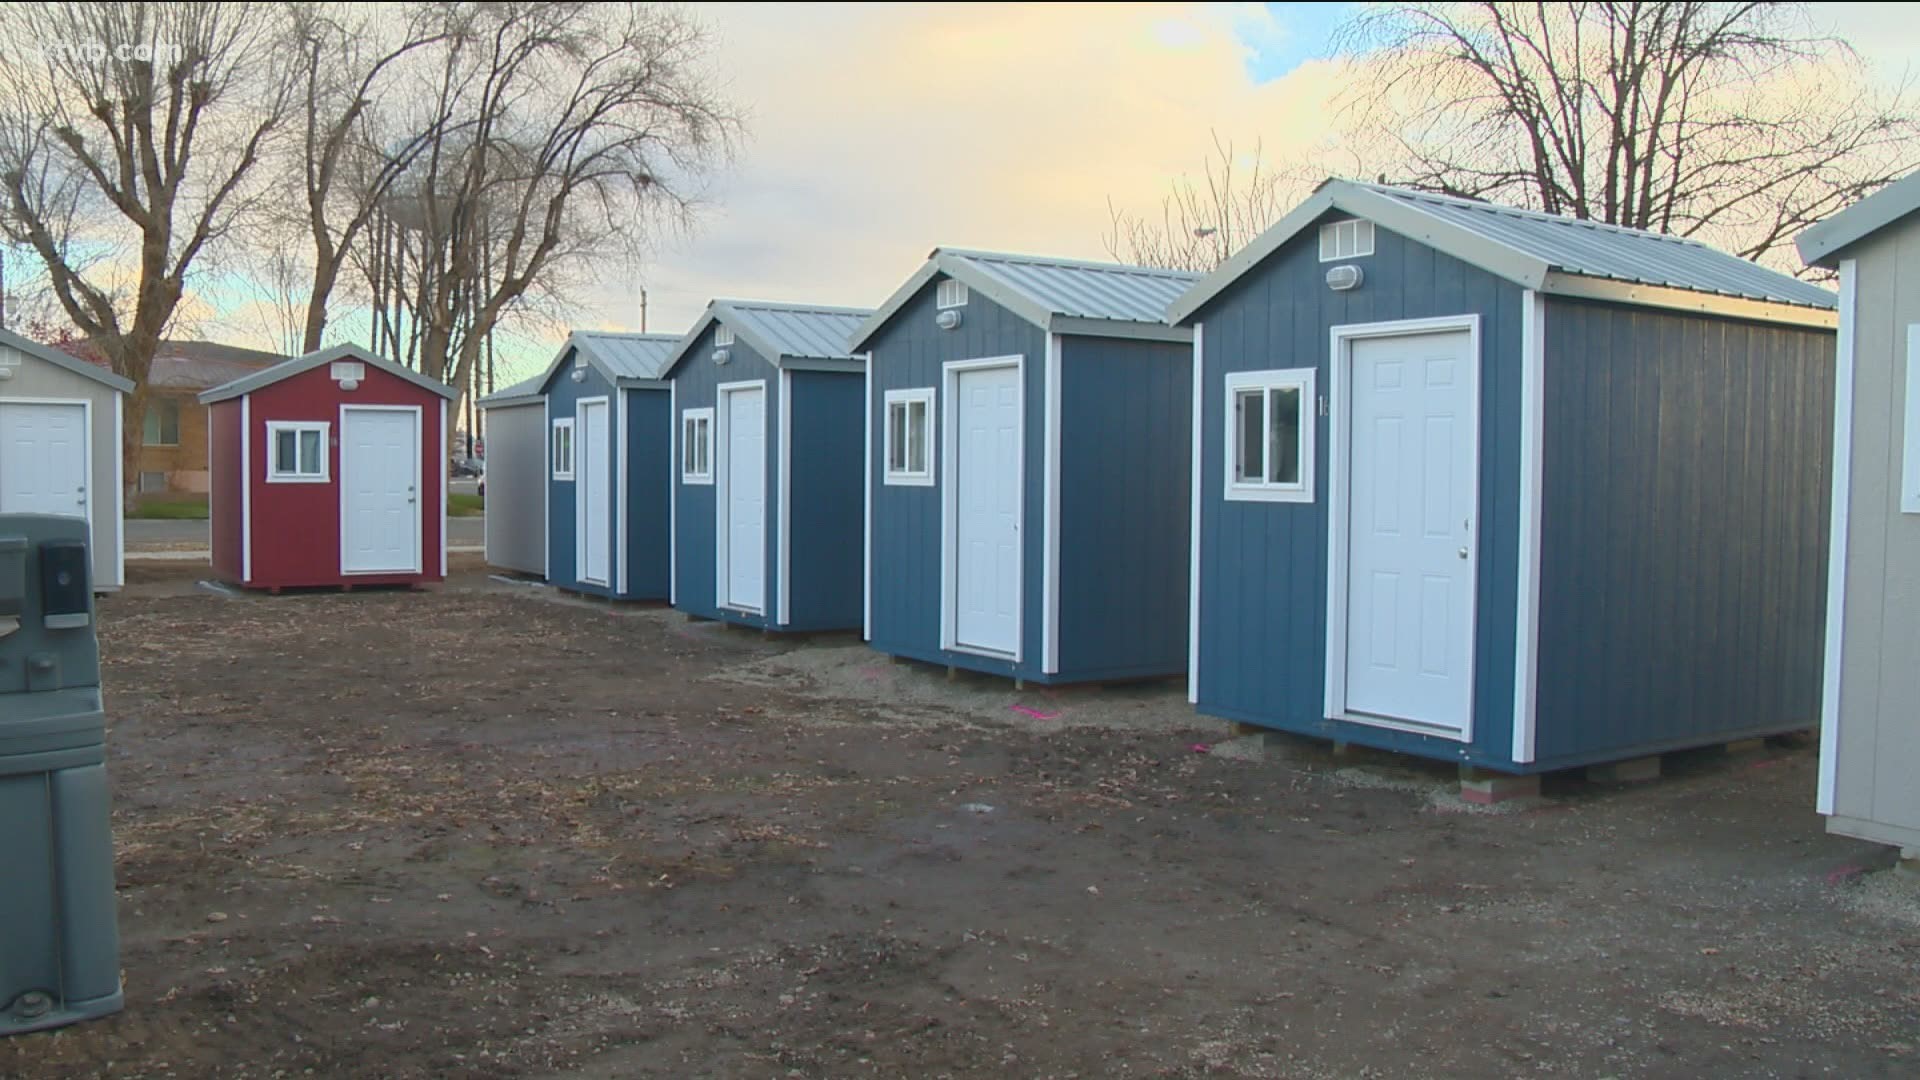 In a 4-3 vote, Ontario City Council decided that the tiny homes' current location would not be a permanent one.